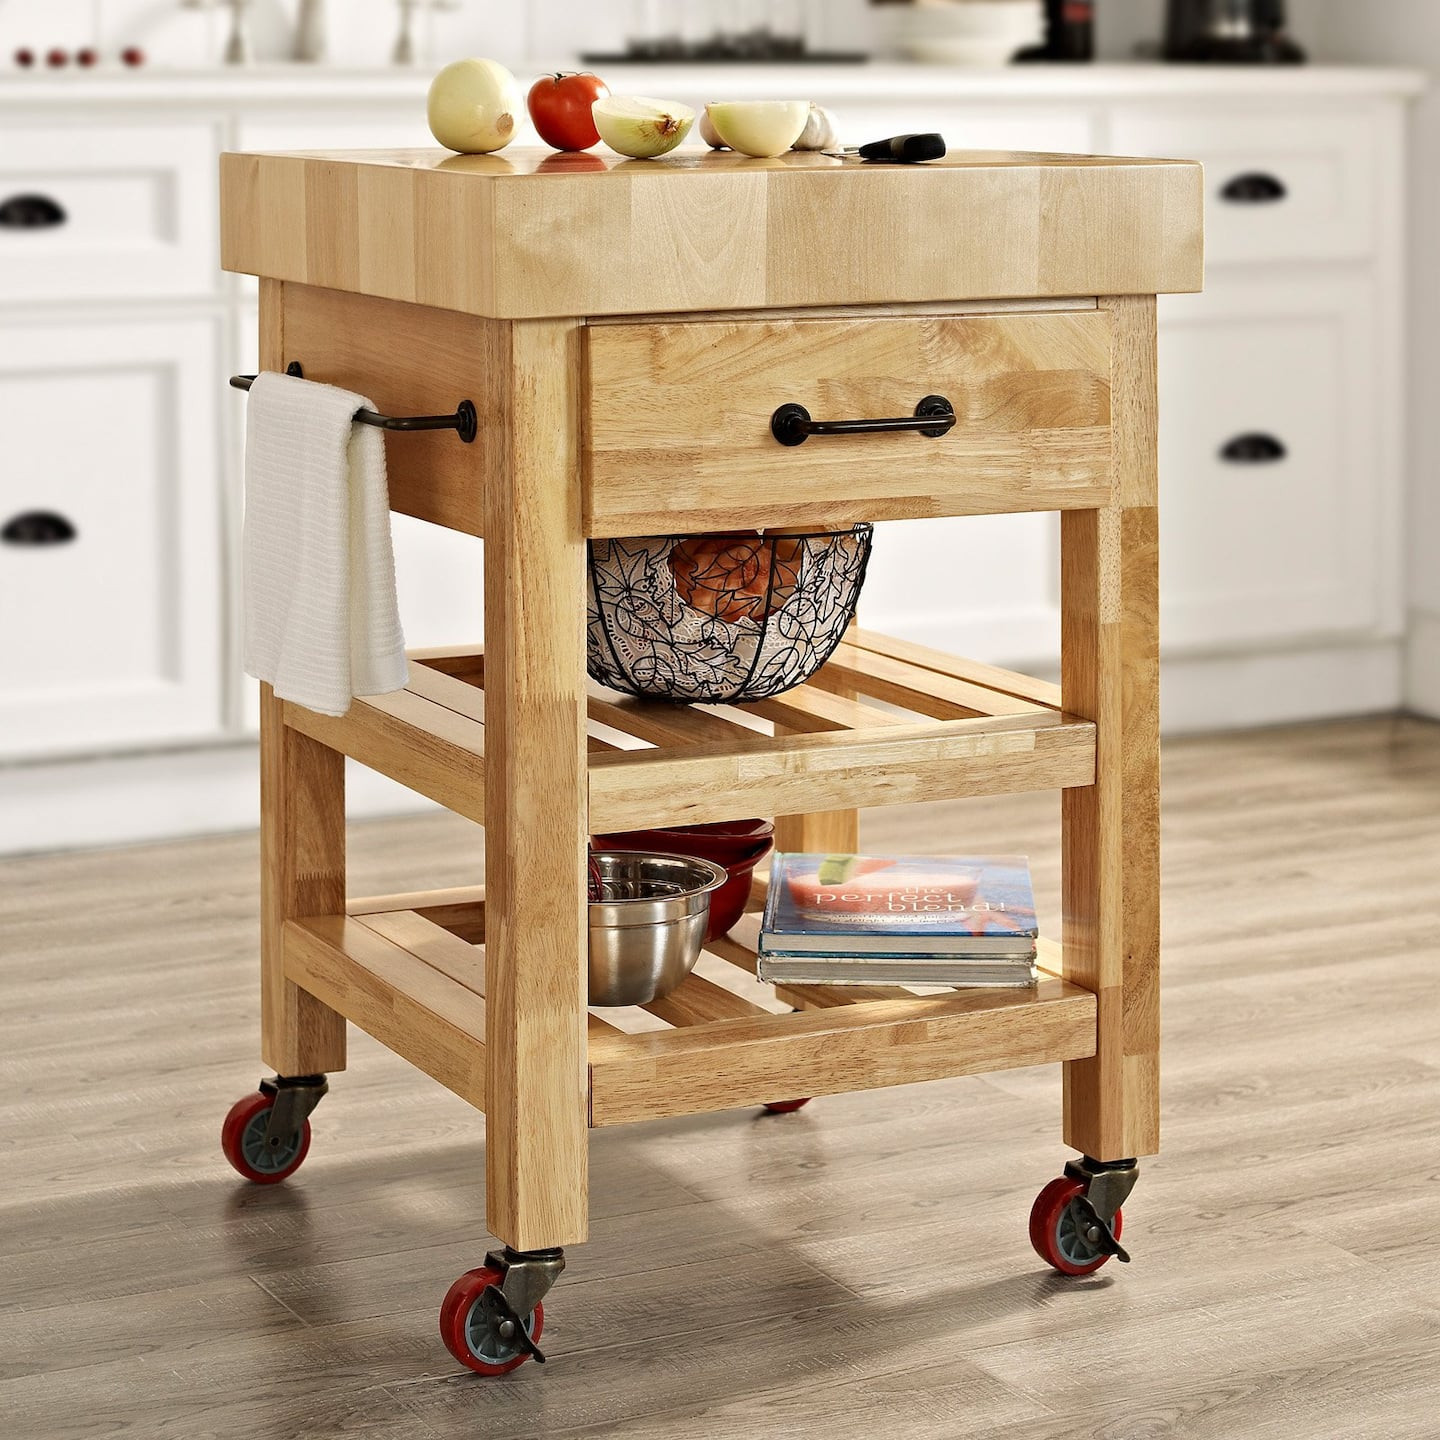 Small Rolling Kitchen Cart Awesome Rolling Kitchen Islands And Kitchen Island Carts Of Small Rolling Kitchen Cart 